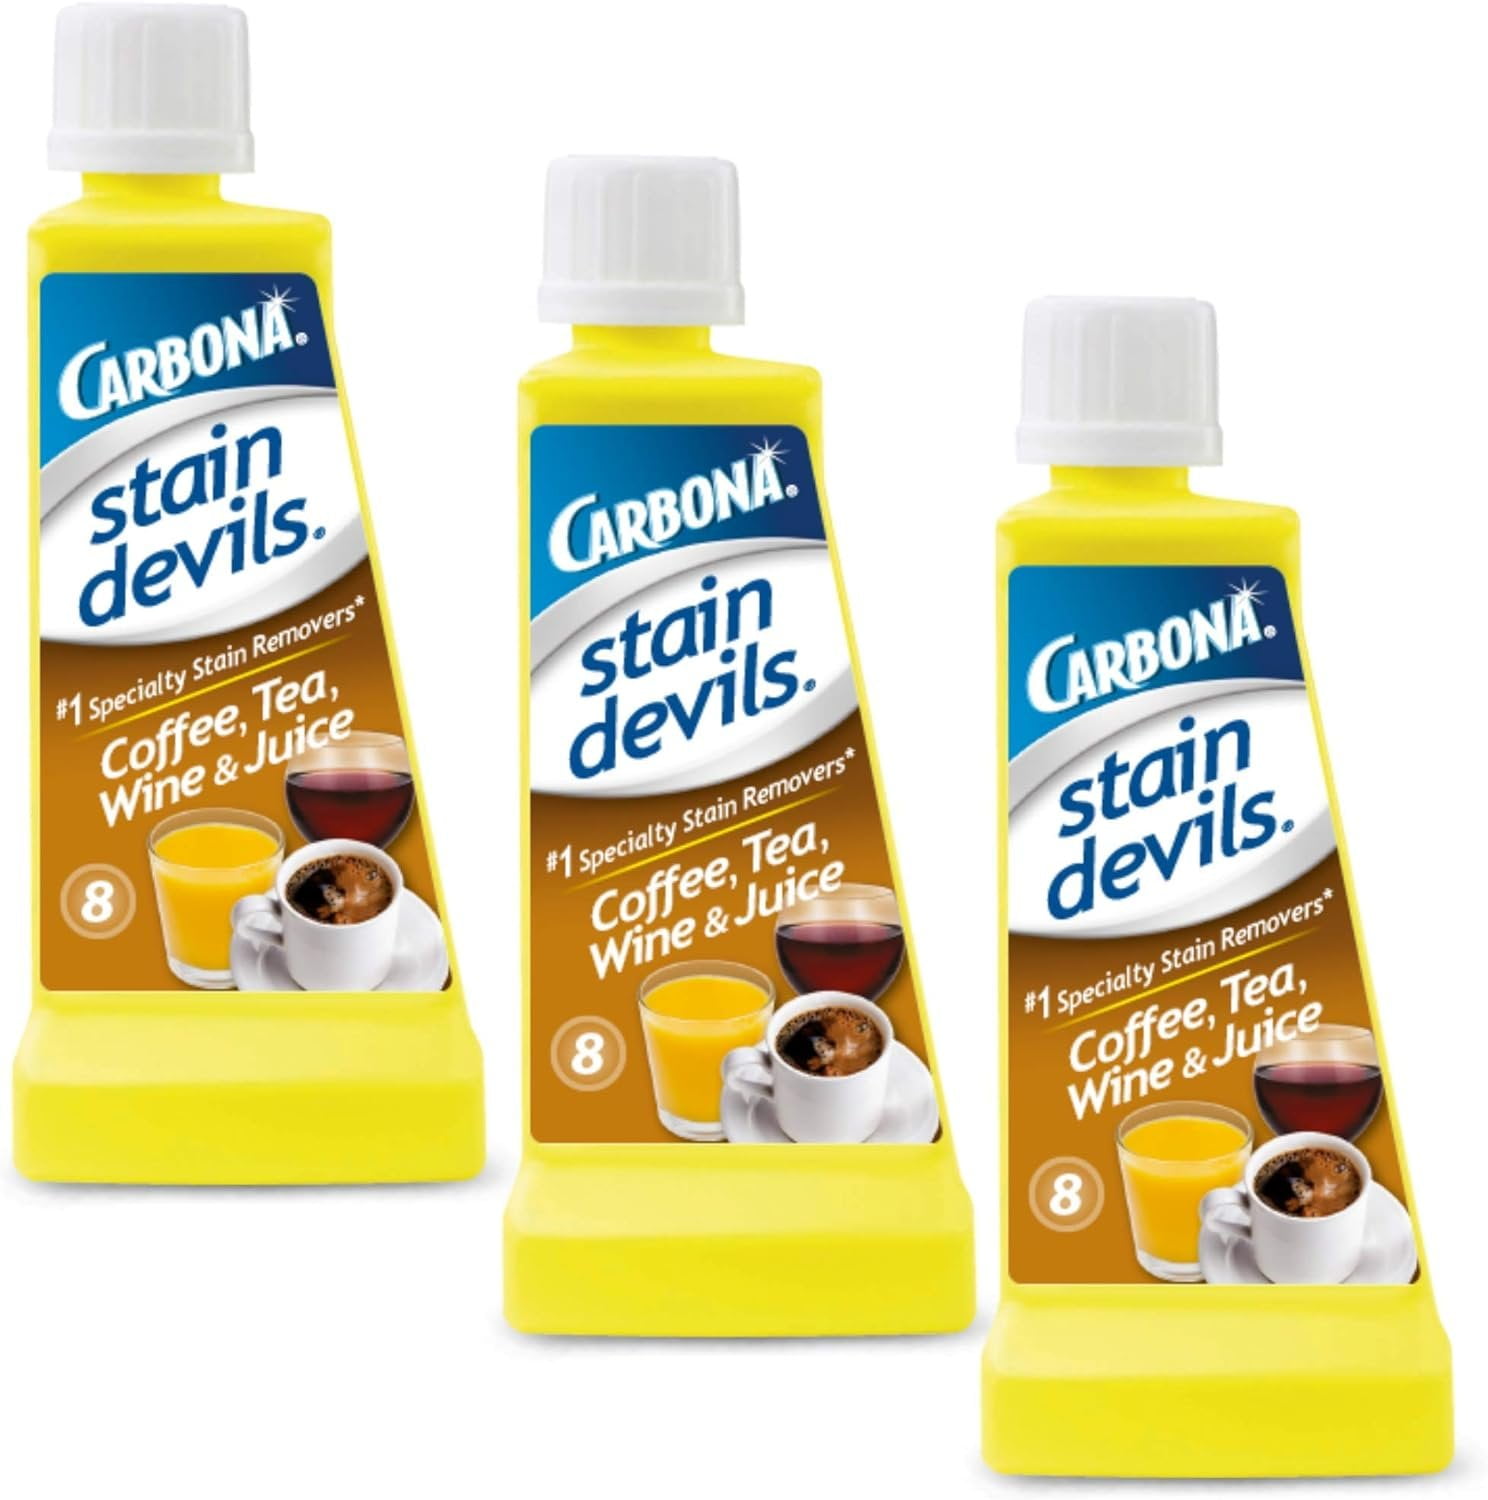 Save on Carbona Stain Devils Stain Remover Blood, Dairy & Ice